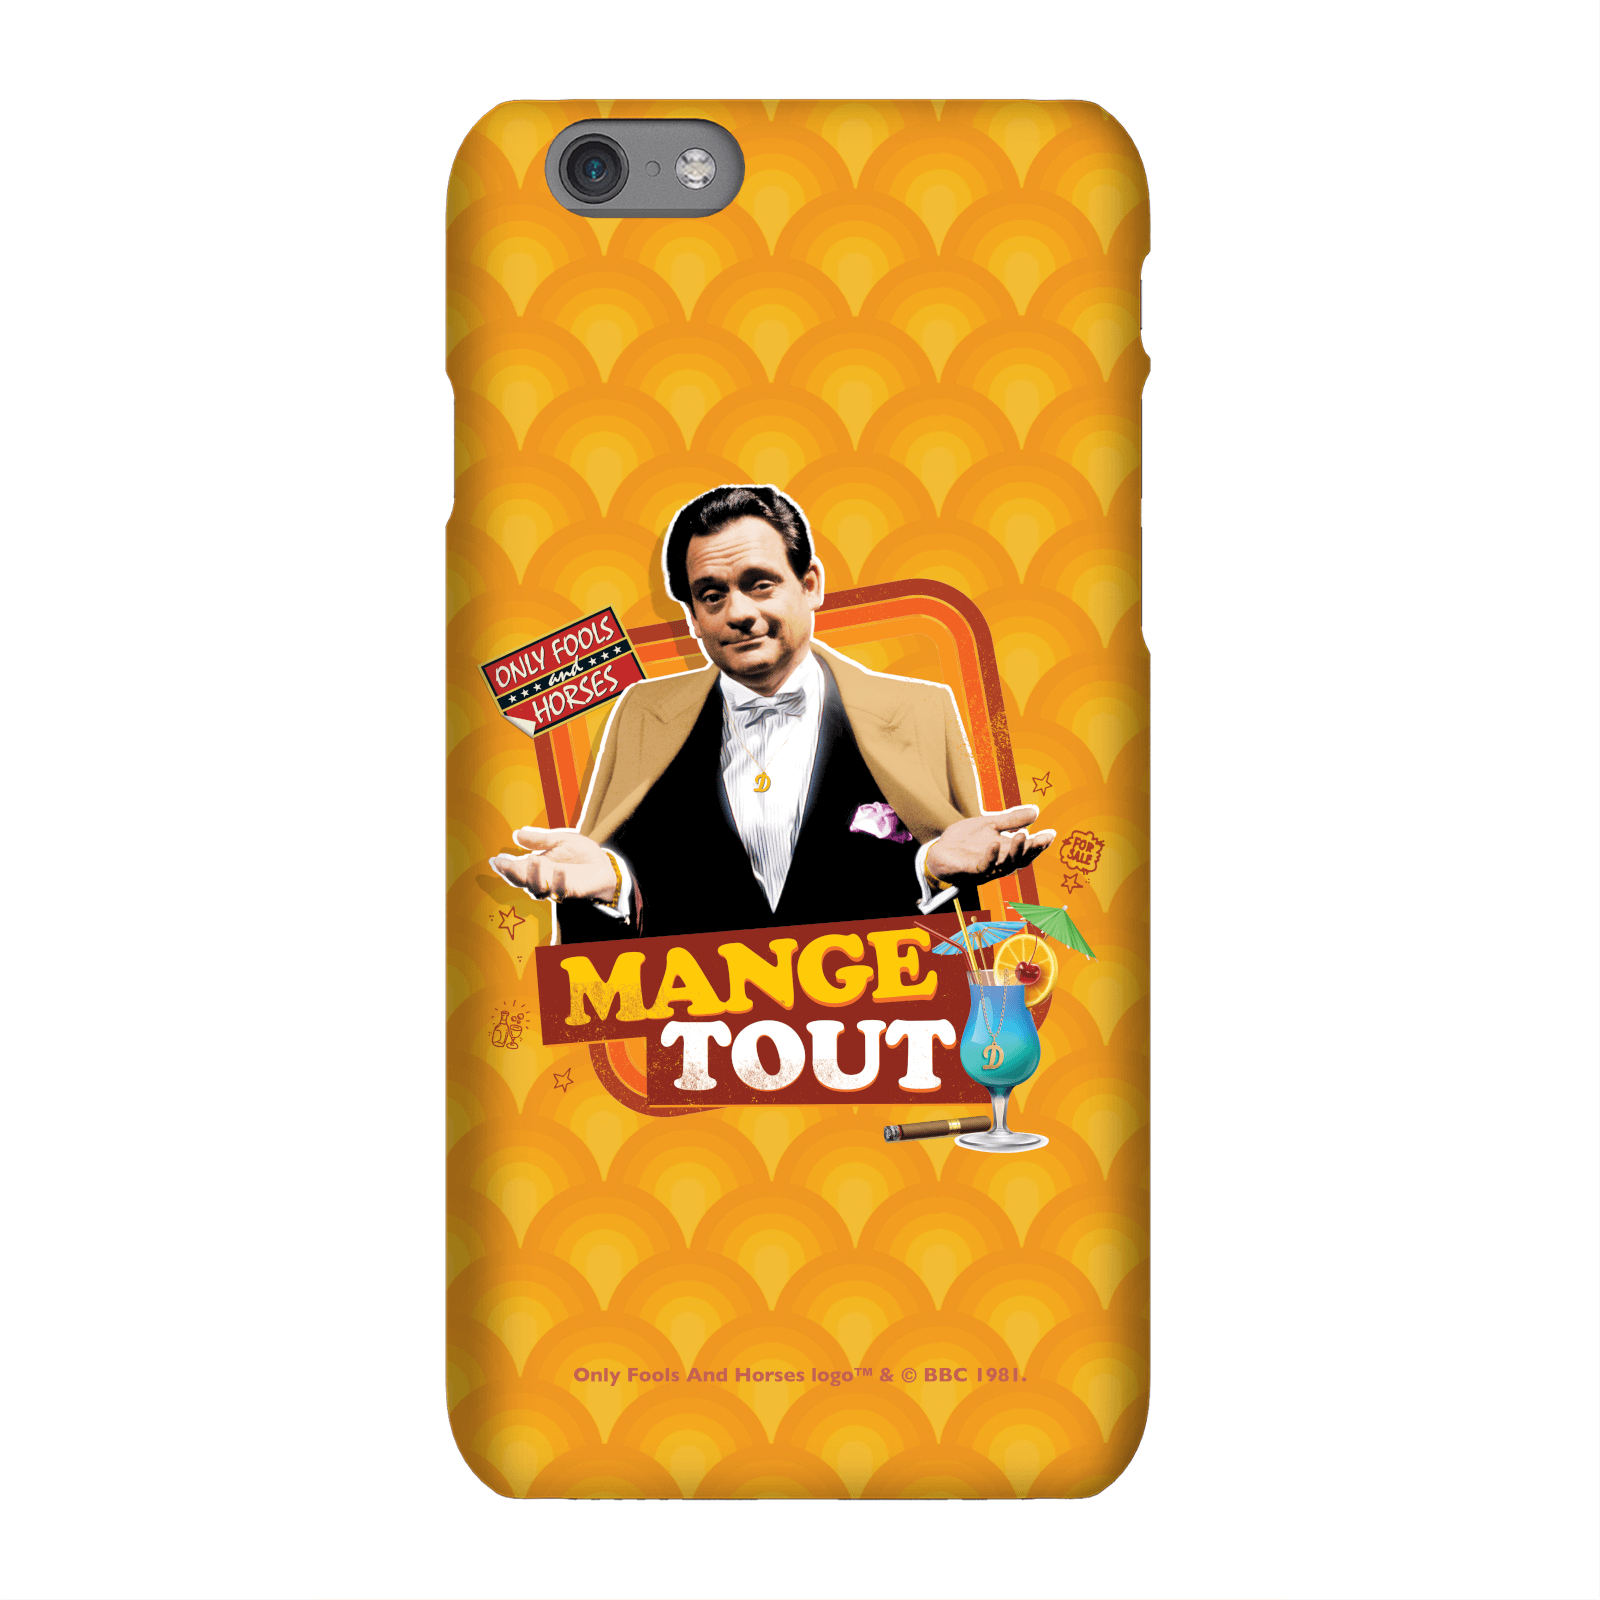 Only Fools And Horses Mange Tout Phone Case for iPhone and Android - Samsung S9 - Carcasa rígida - Mate